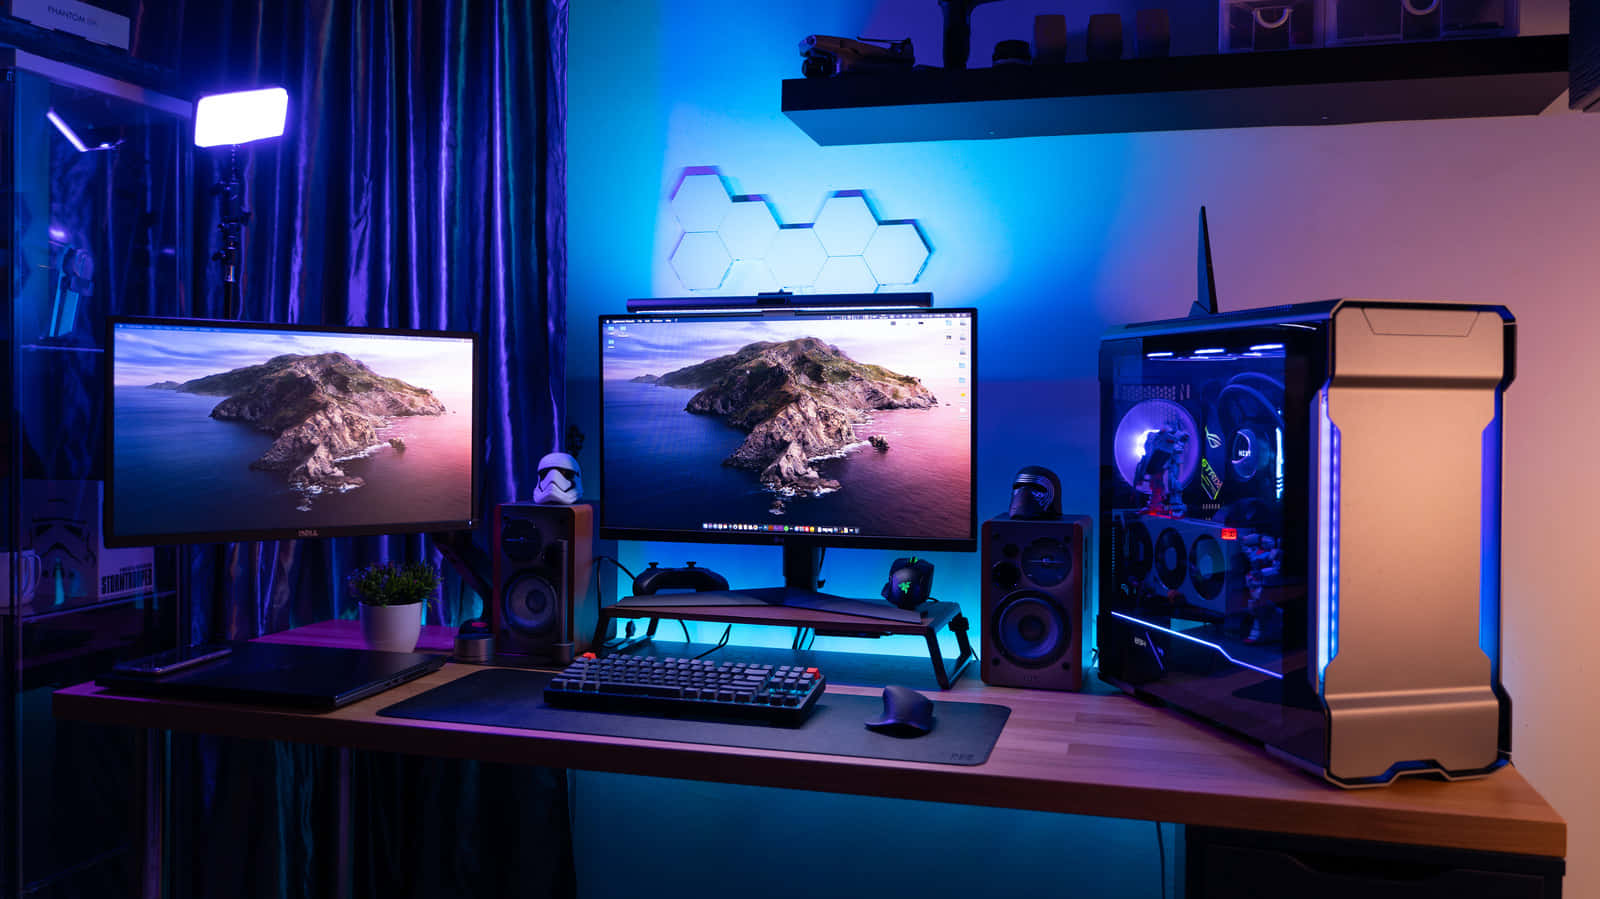 Ready for Serious Gaming - Perfect Gaming PC Setup Wallpaper